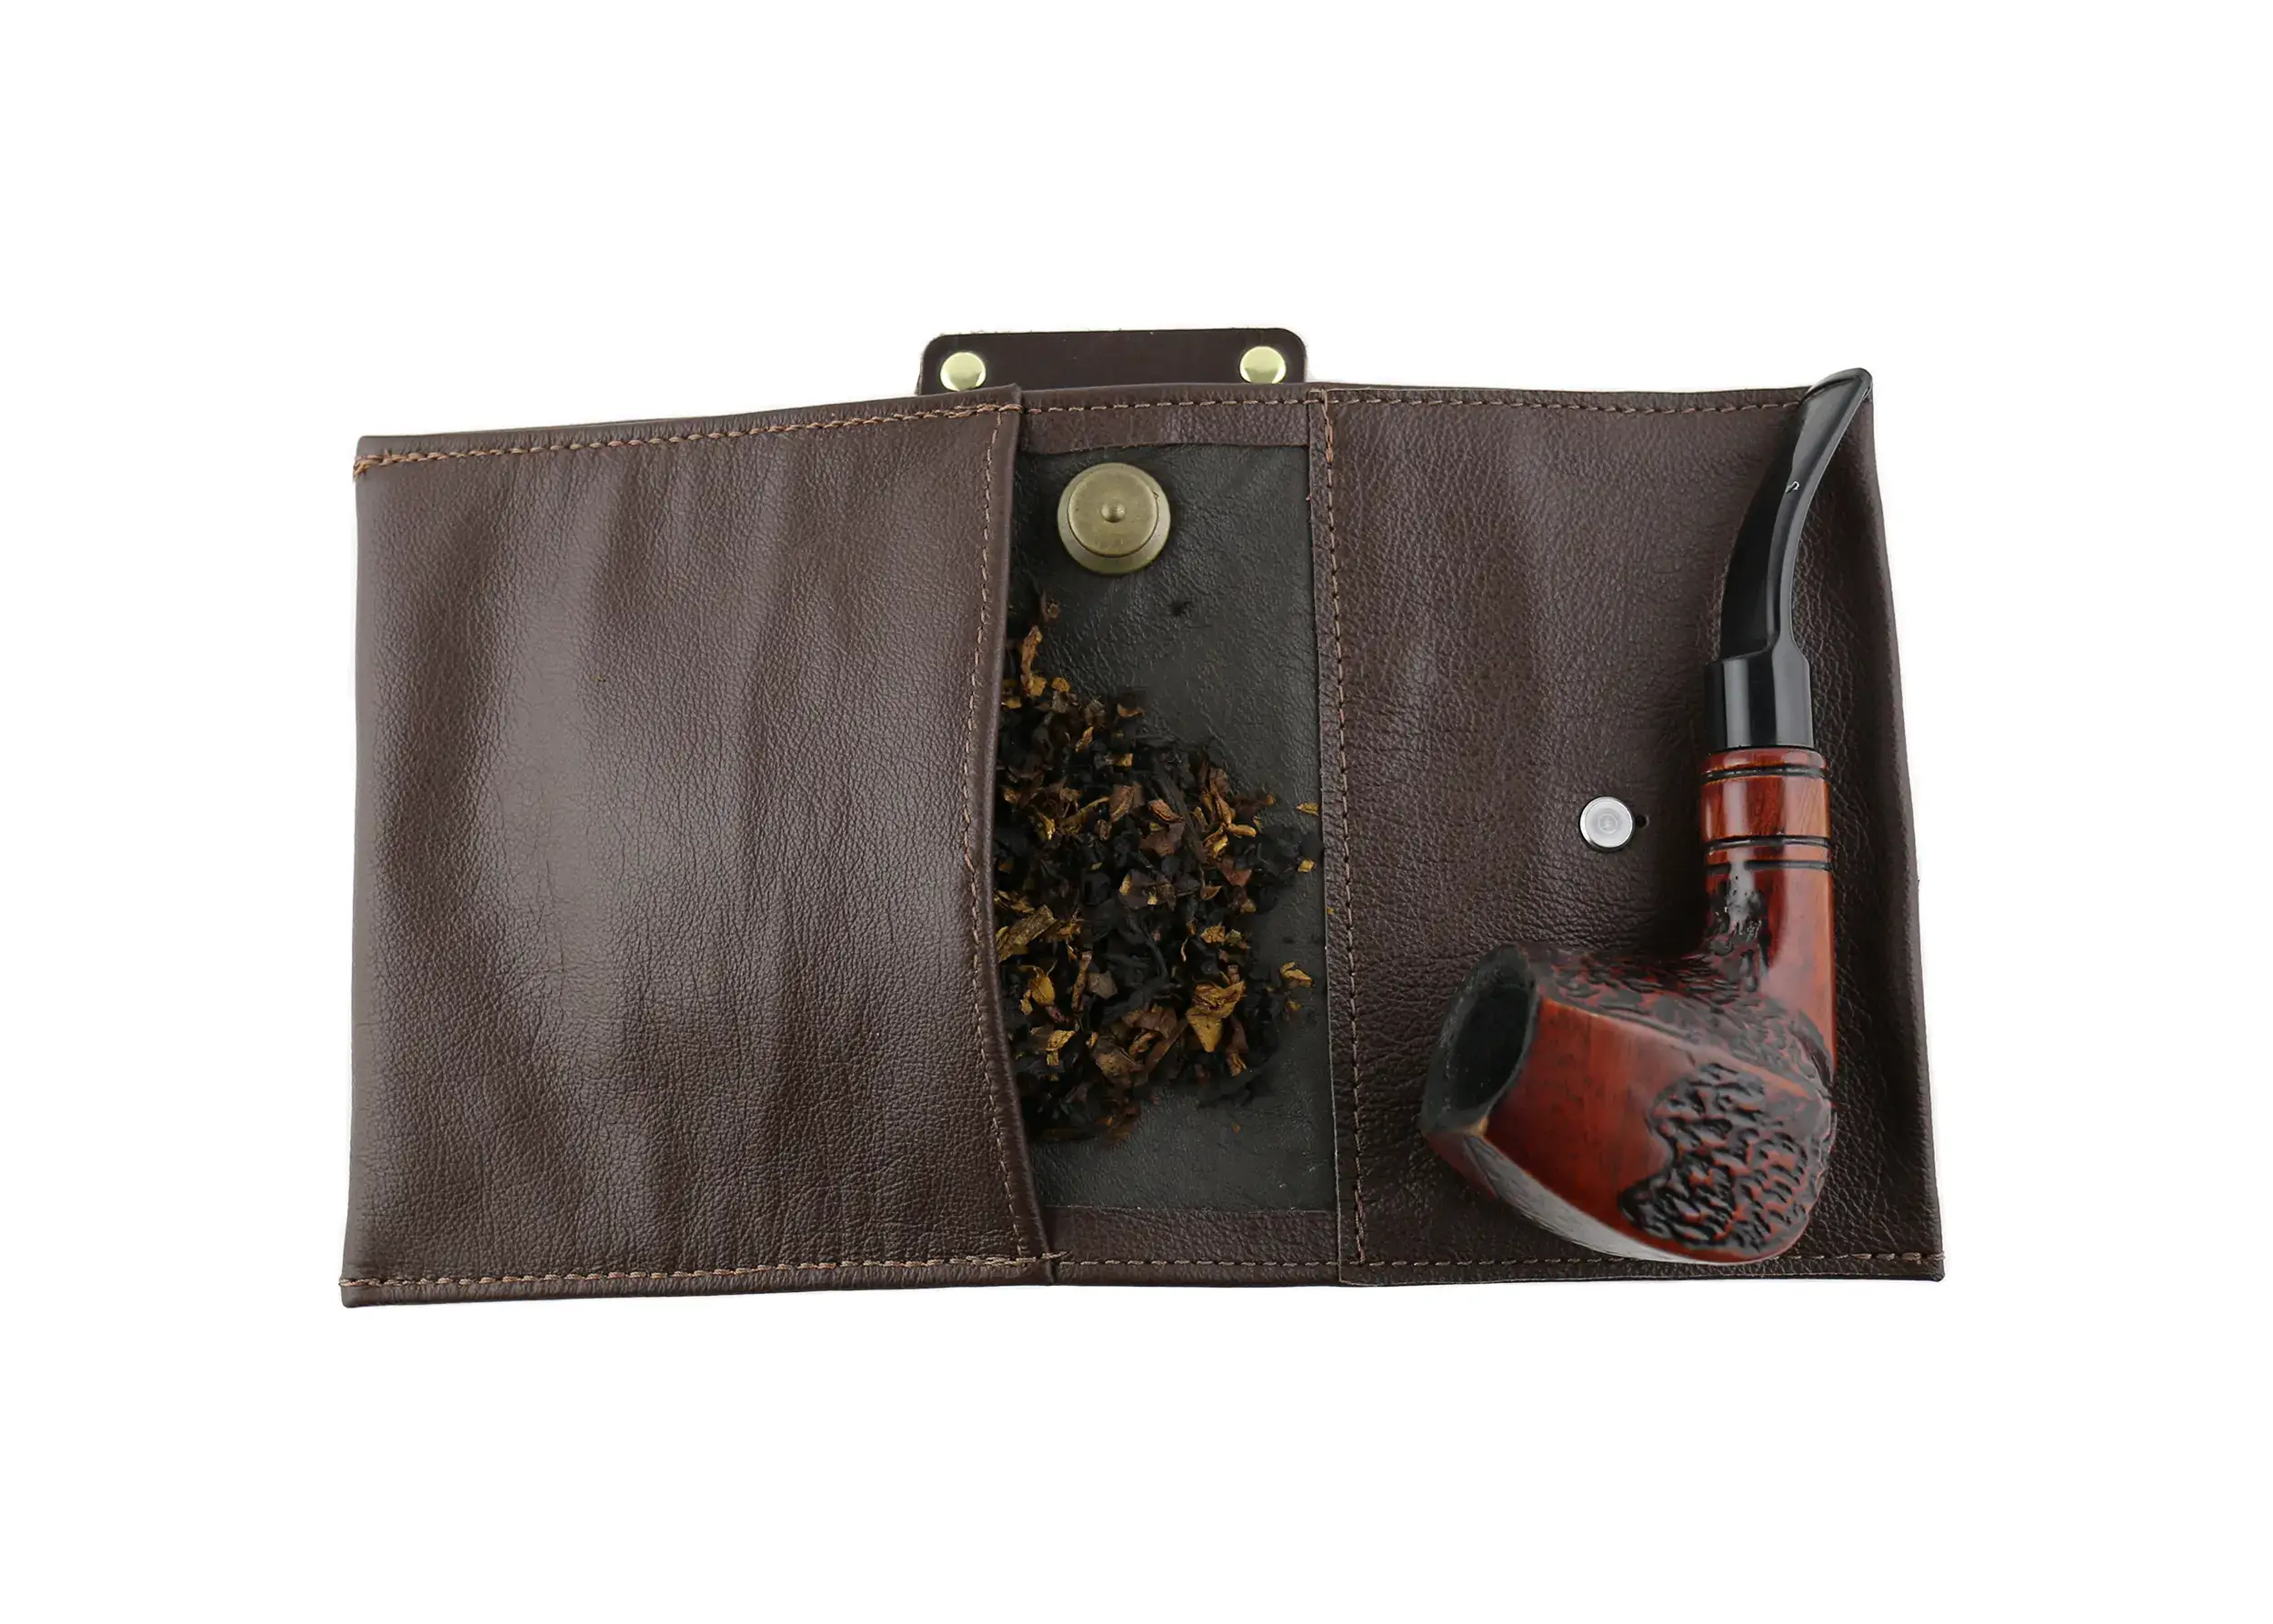 Black leather tobacco pouch for 1 pipe with a vintage style - La Pipe Rit